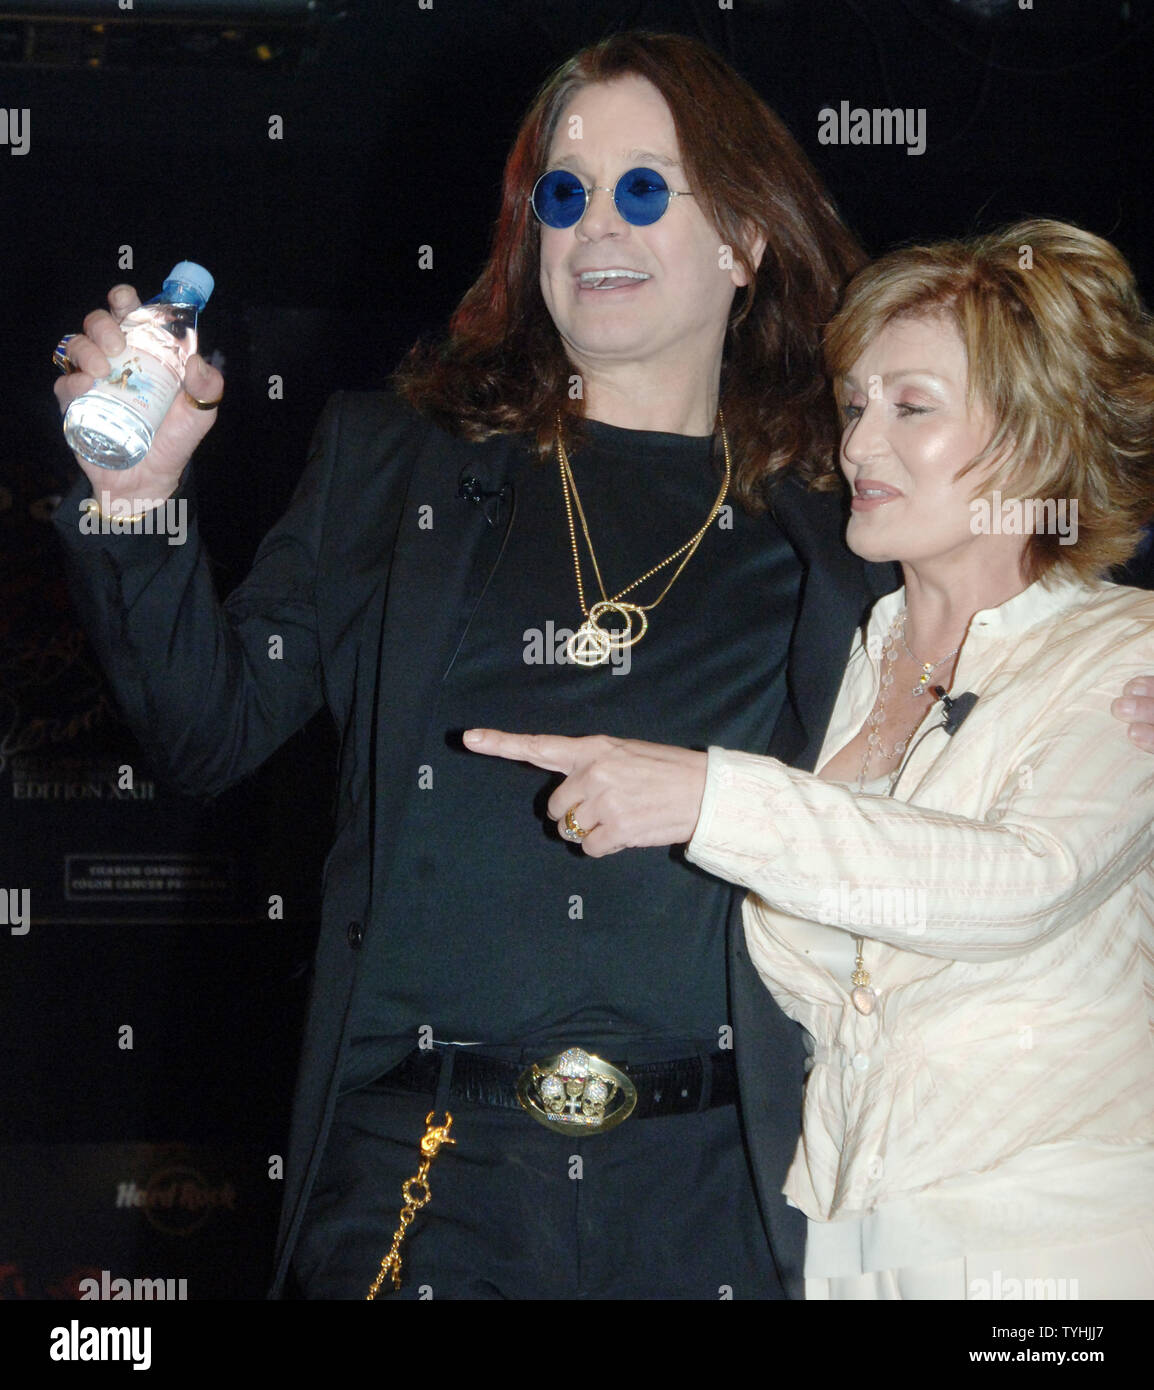 Ozzy Osbourne, the "Godfather of Heavy Metal" and his wife Sharon Osbourne  unveil on July 28, 2006 a limited edition signature series t shirt for the Hard  Rock cafe designed by Ozzy.Proceeds